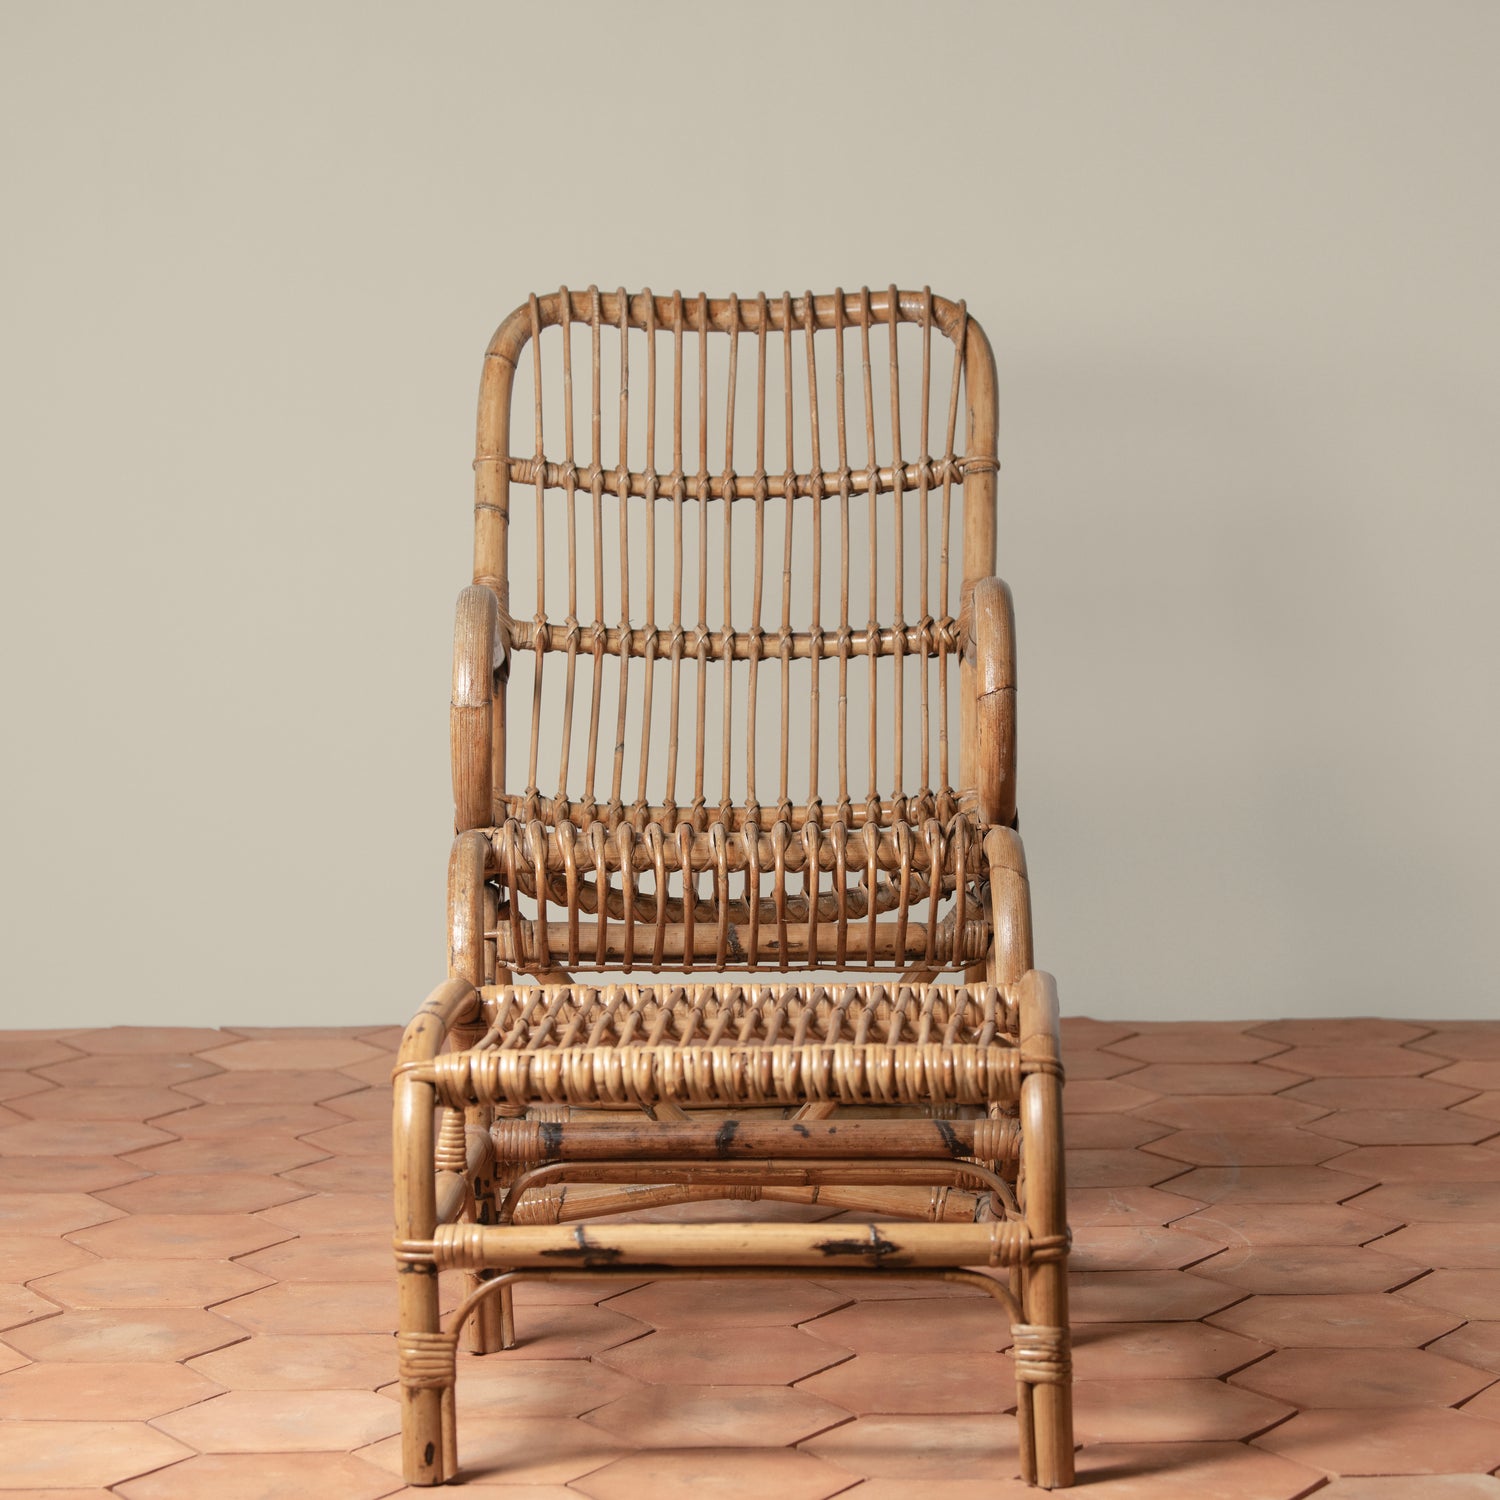 Vintage Rattan Rocking Chair with Ottoman